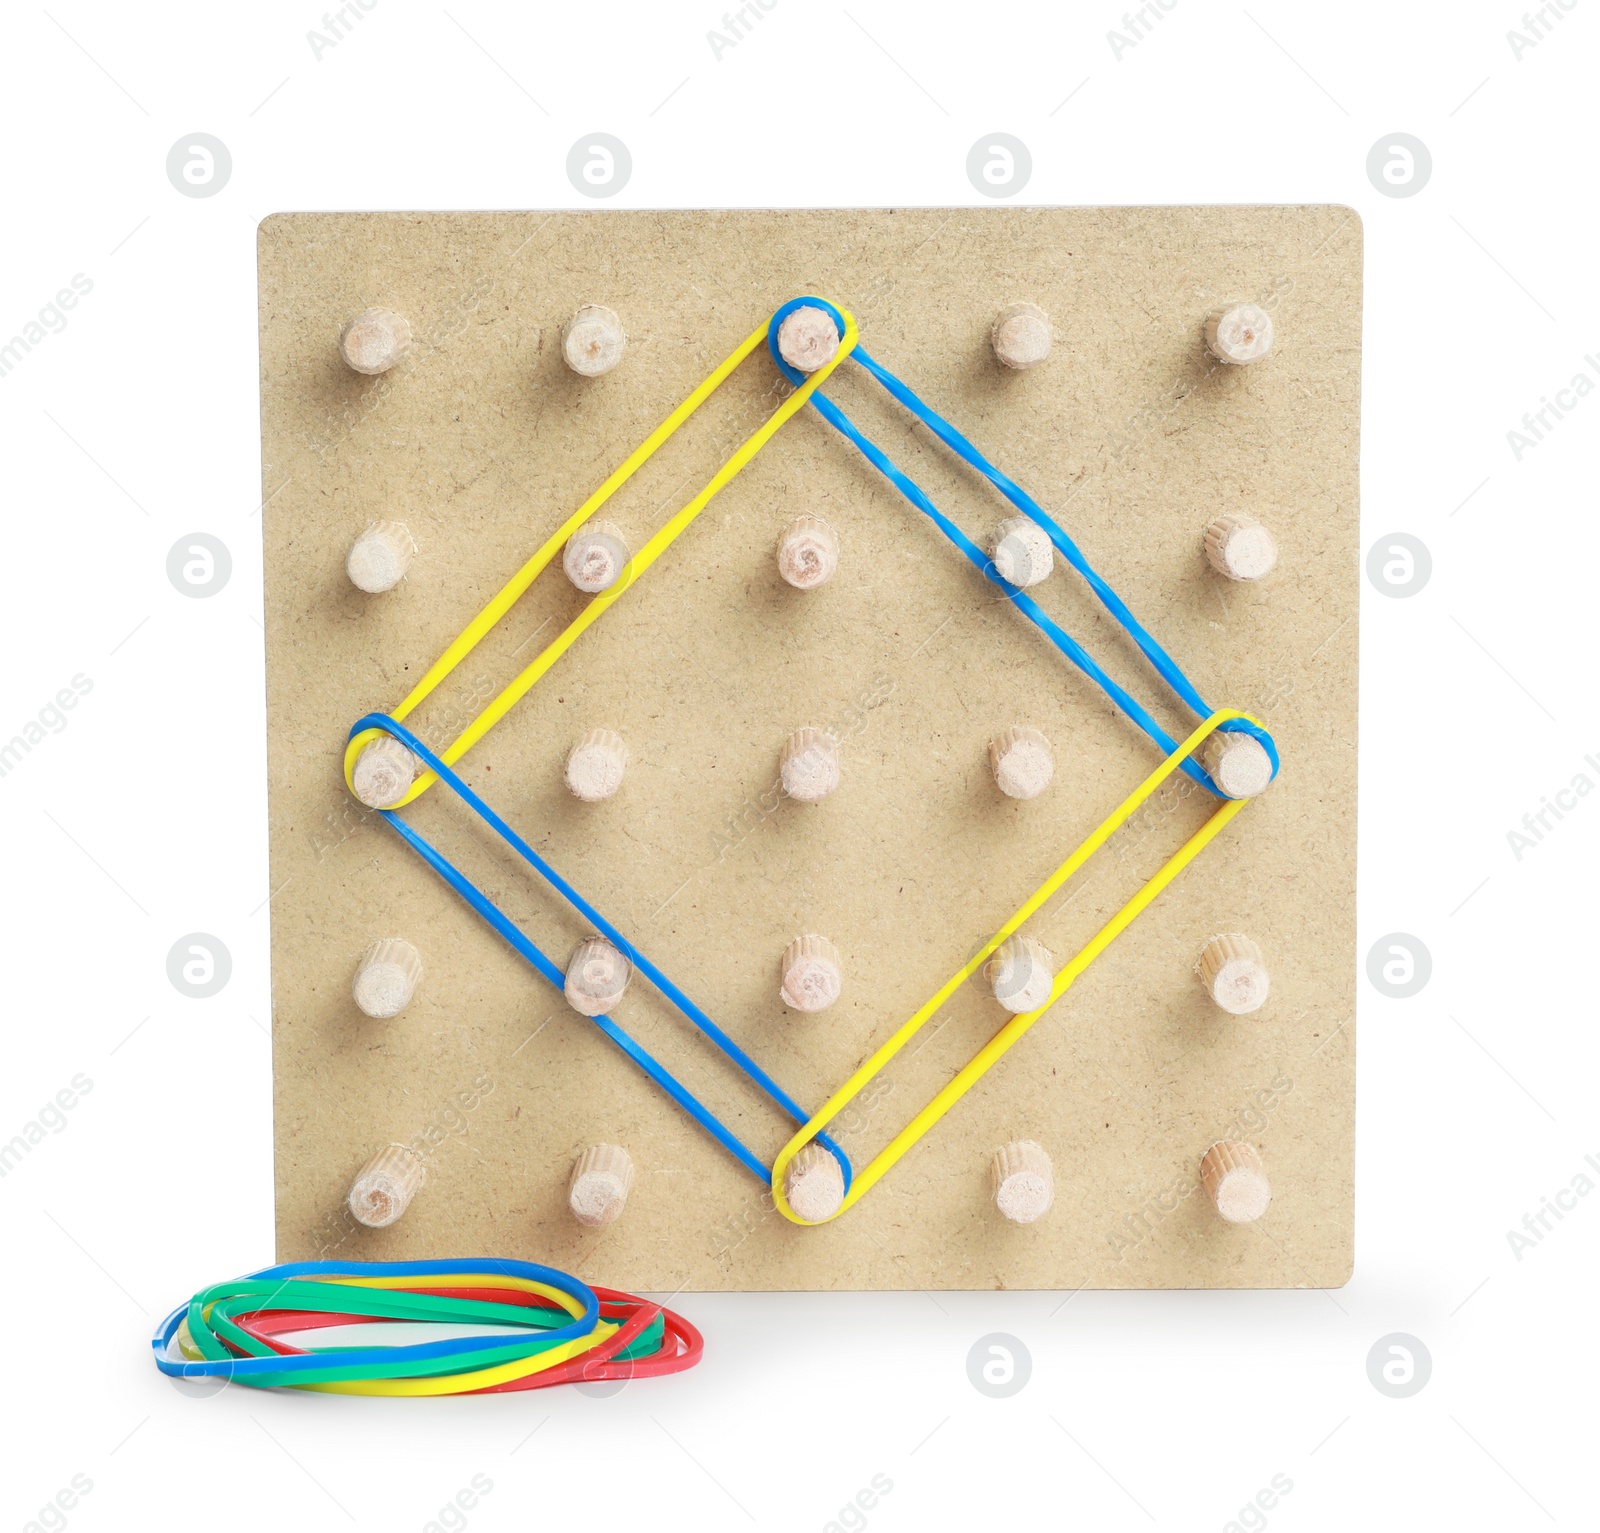 Photo of Wooden geoboard with rhombus made of colorful rubber bands isolated on white. Educational toy for motor skills development